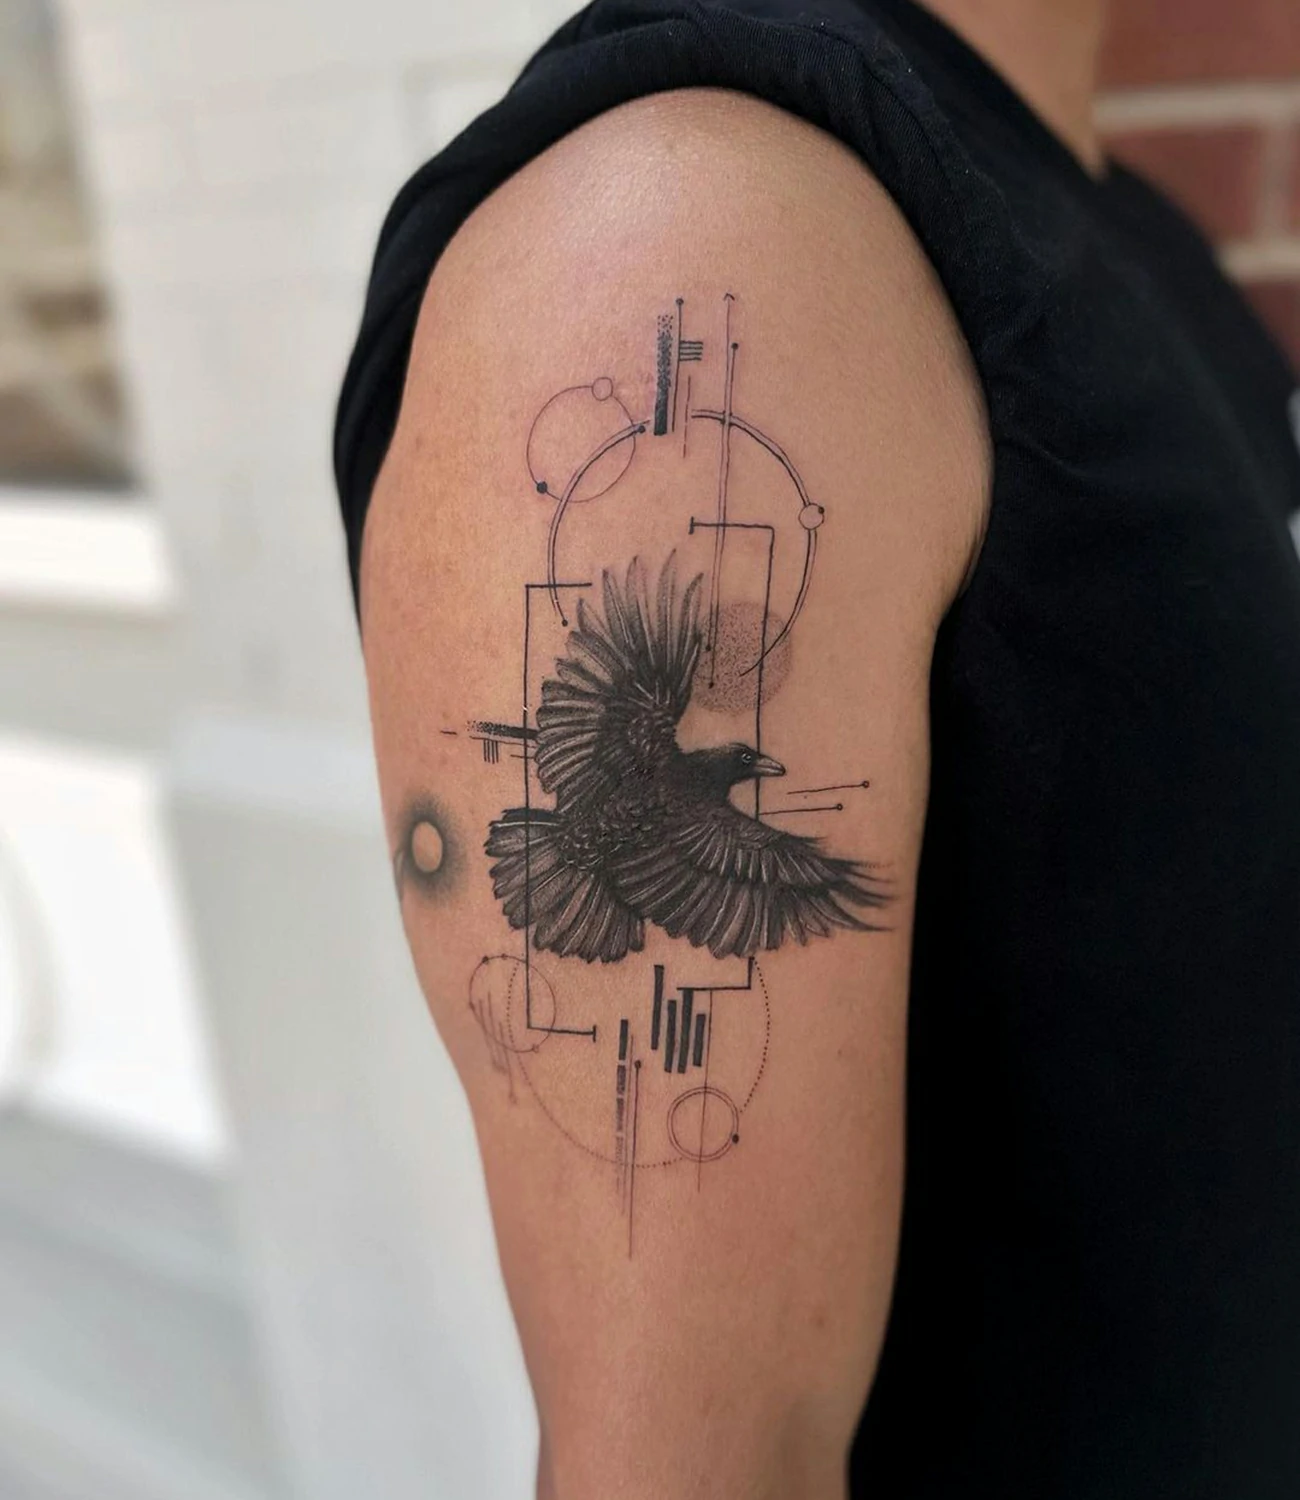 Geometric raven tattoo: A modern take on raven tattoos with geometric shapes and lines.